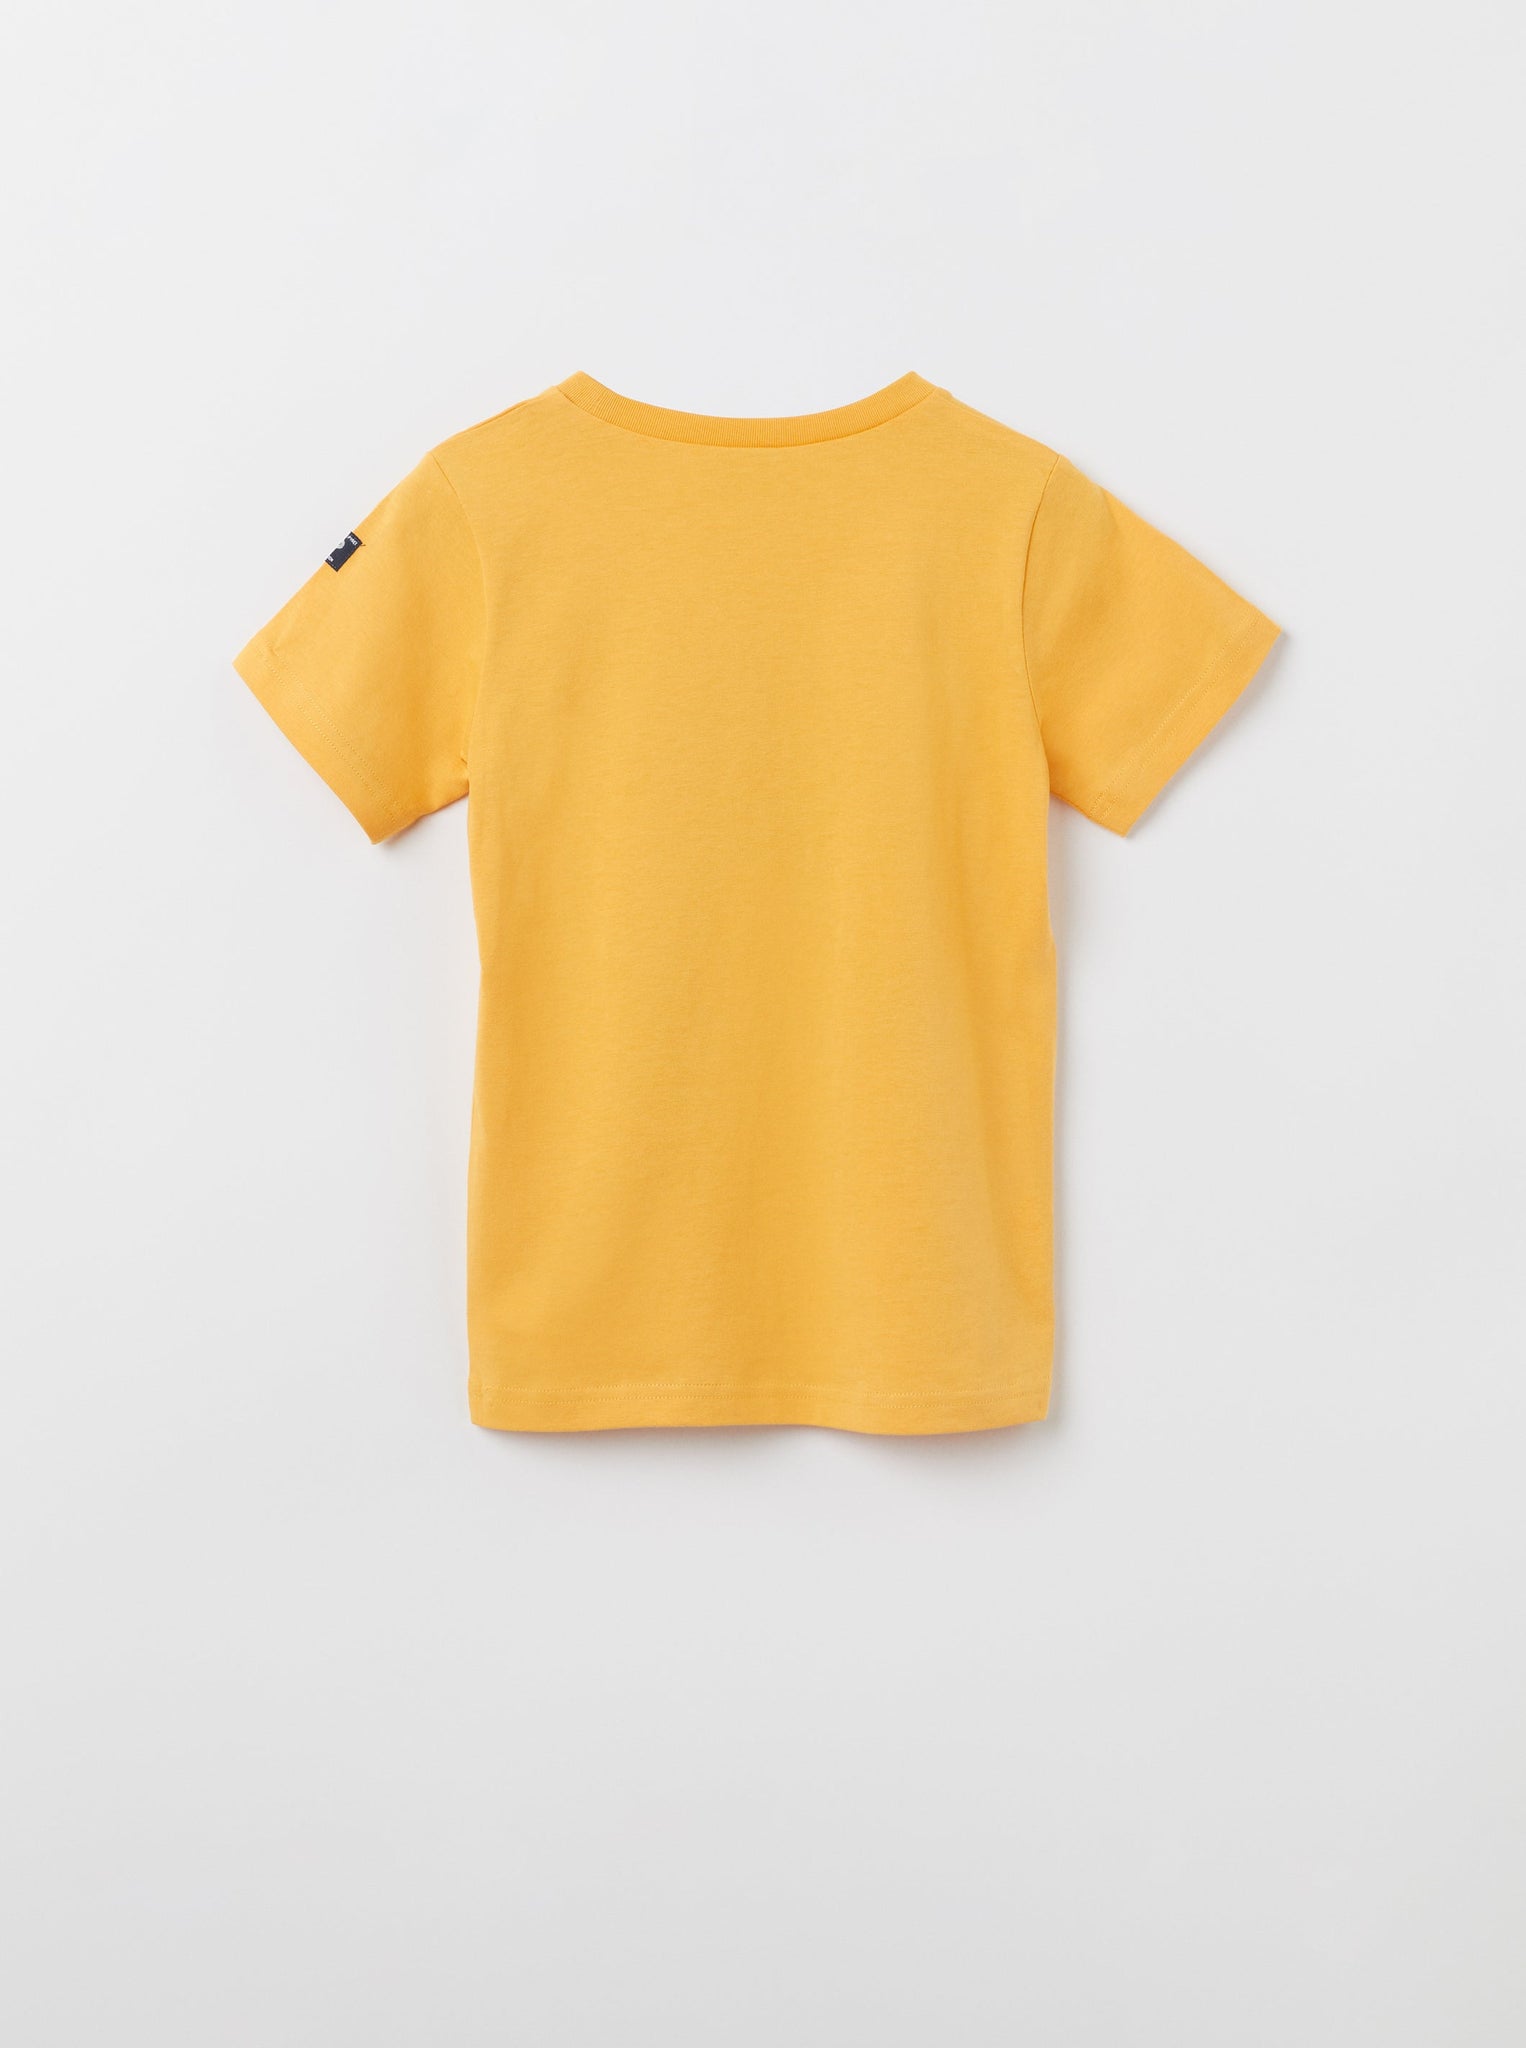 Animal Print Yellow Kids T-Shirt from the Polarn O. Pyret kidswear collection. Clothes made using sustainably sourced materials.